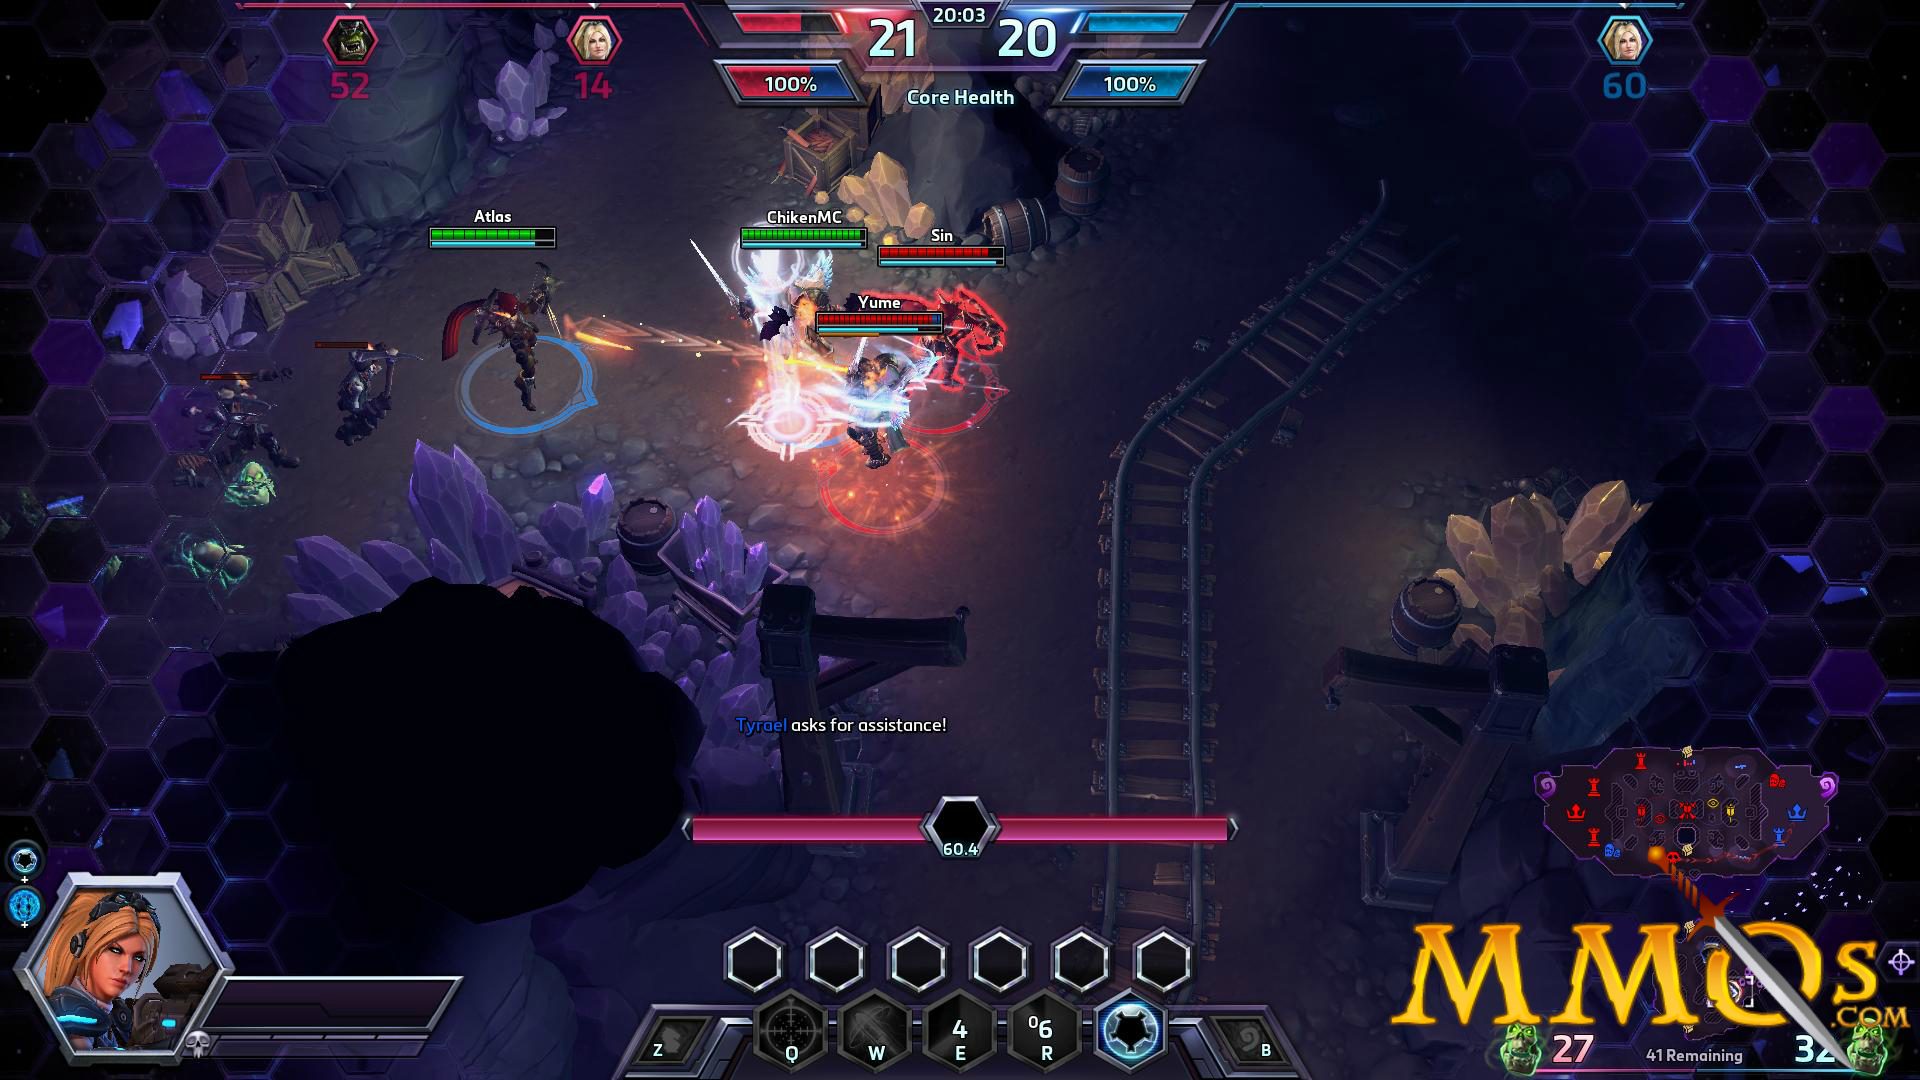 Heroes of the Storm's Development Is Taking a New Turn